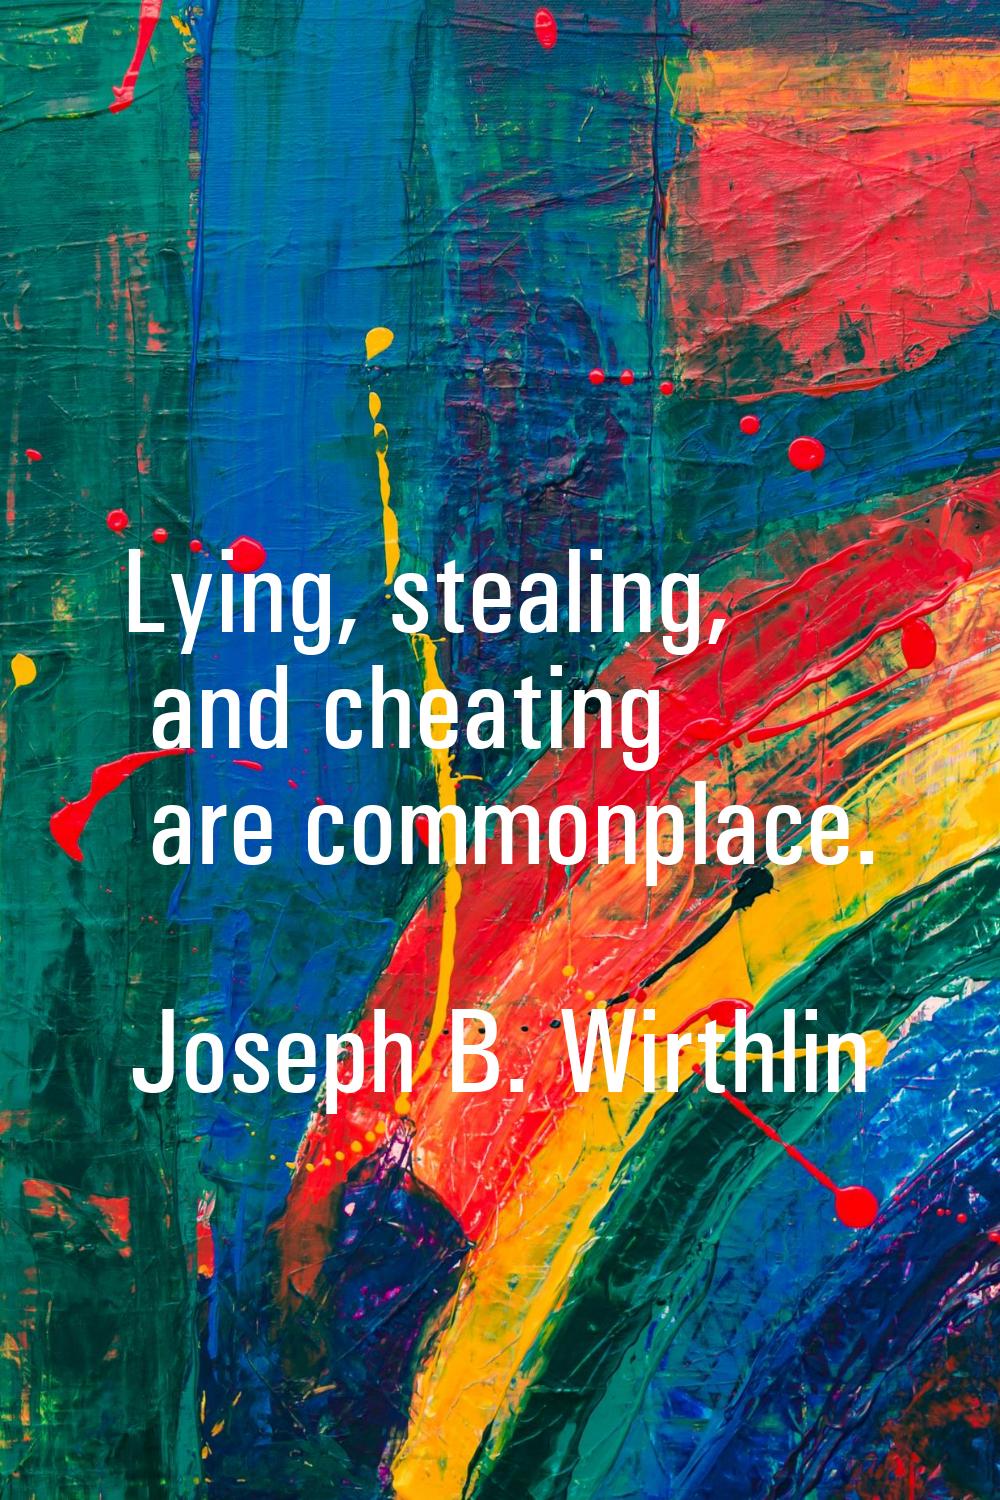 Lying, stealing, and cheating are commonplace.